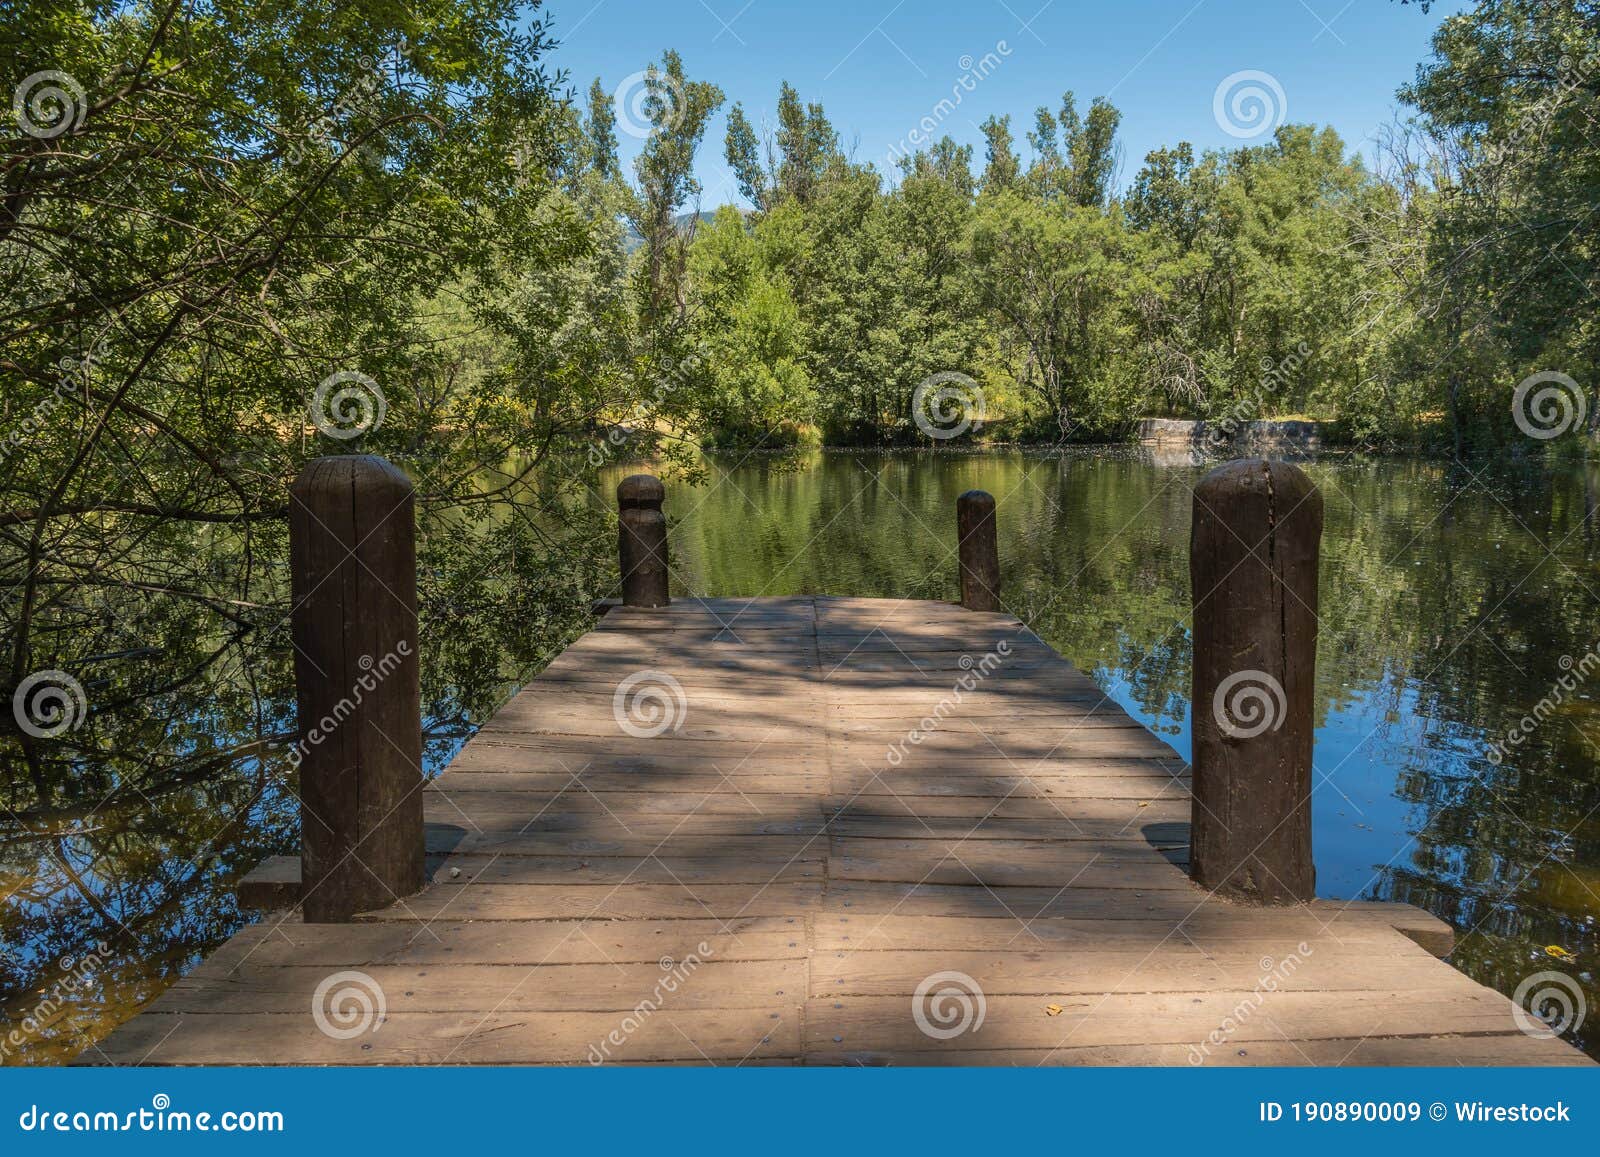 Small Wooden Dock At A Lake Surrounded By Trees On A Sunny Day Stock